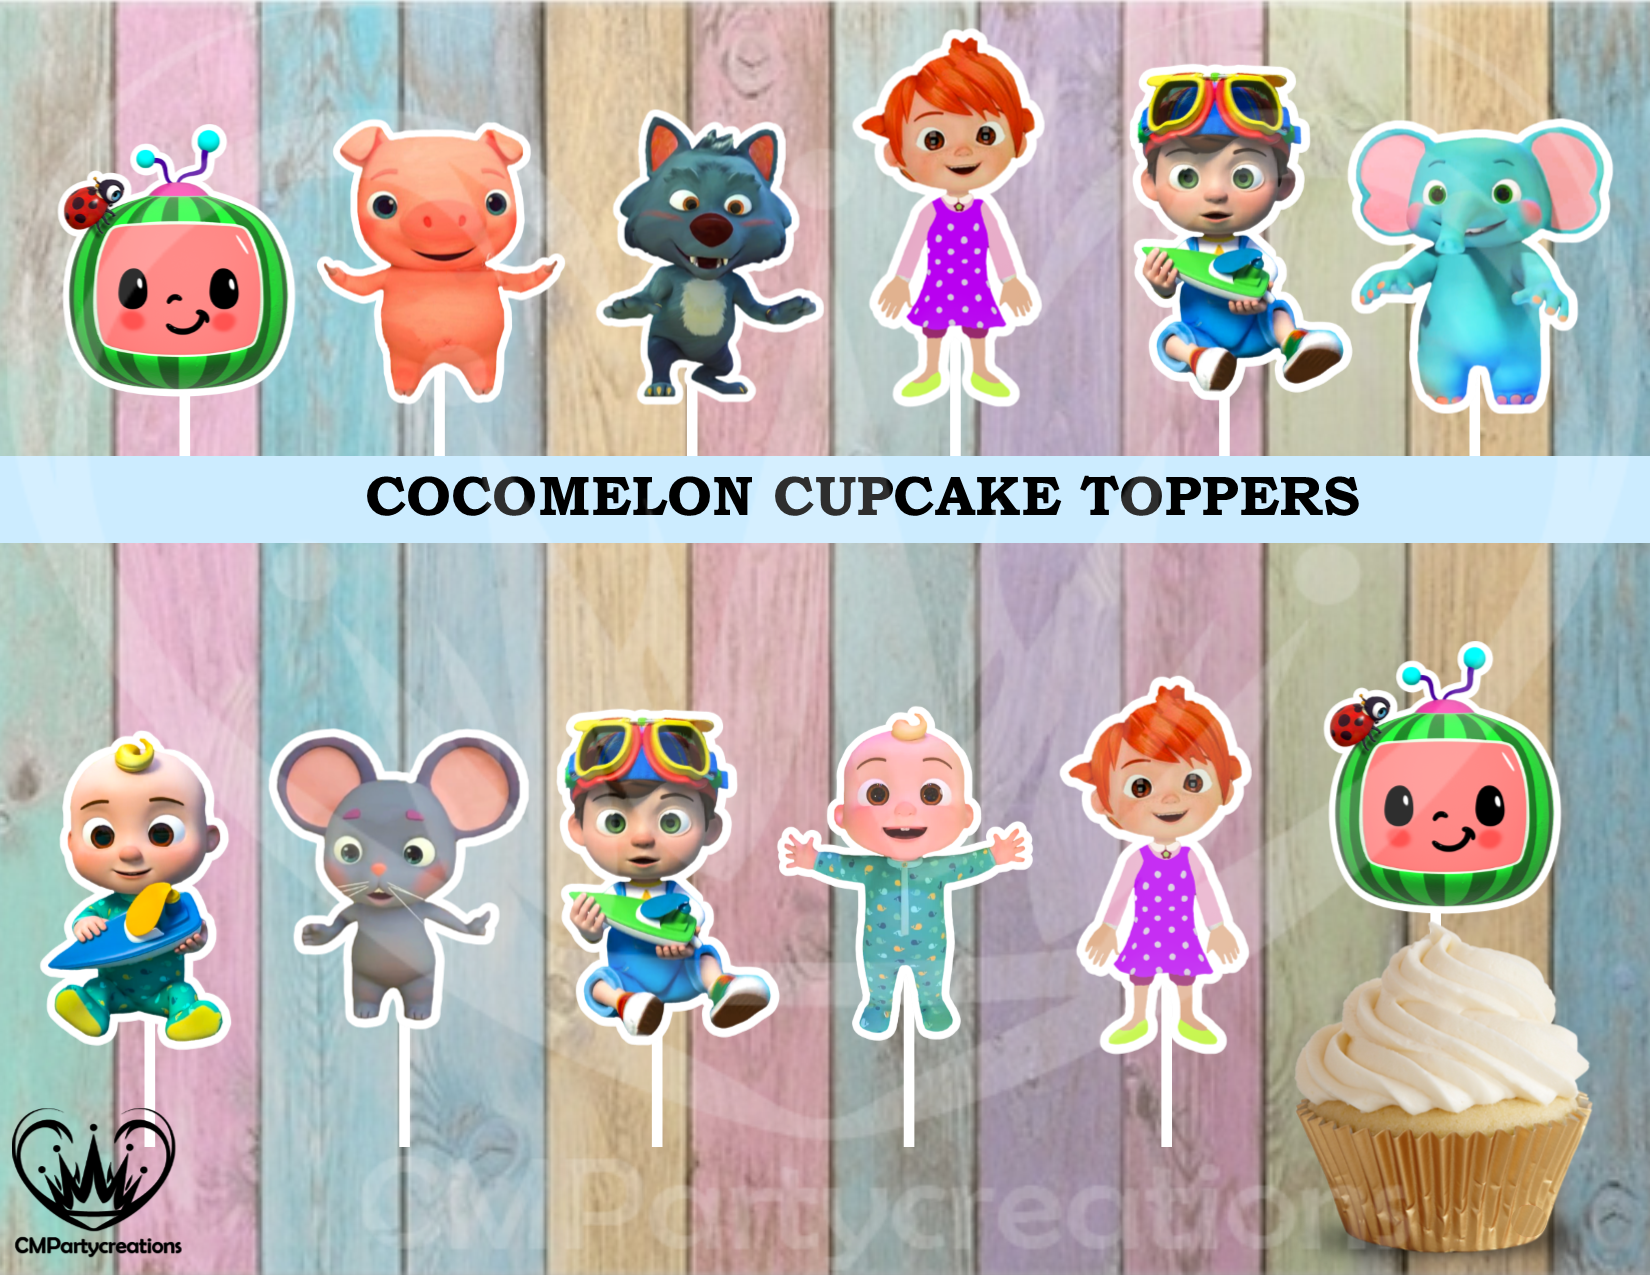 Cocomelon Cupcake Toppers Birthday Party - CMPartycreations